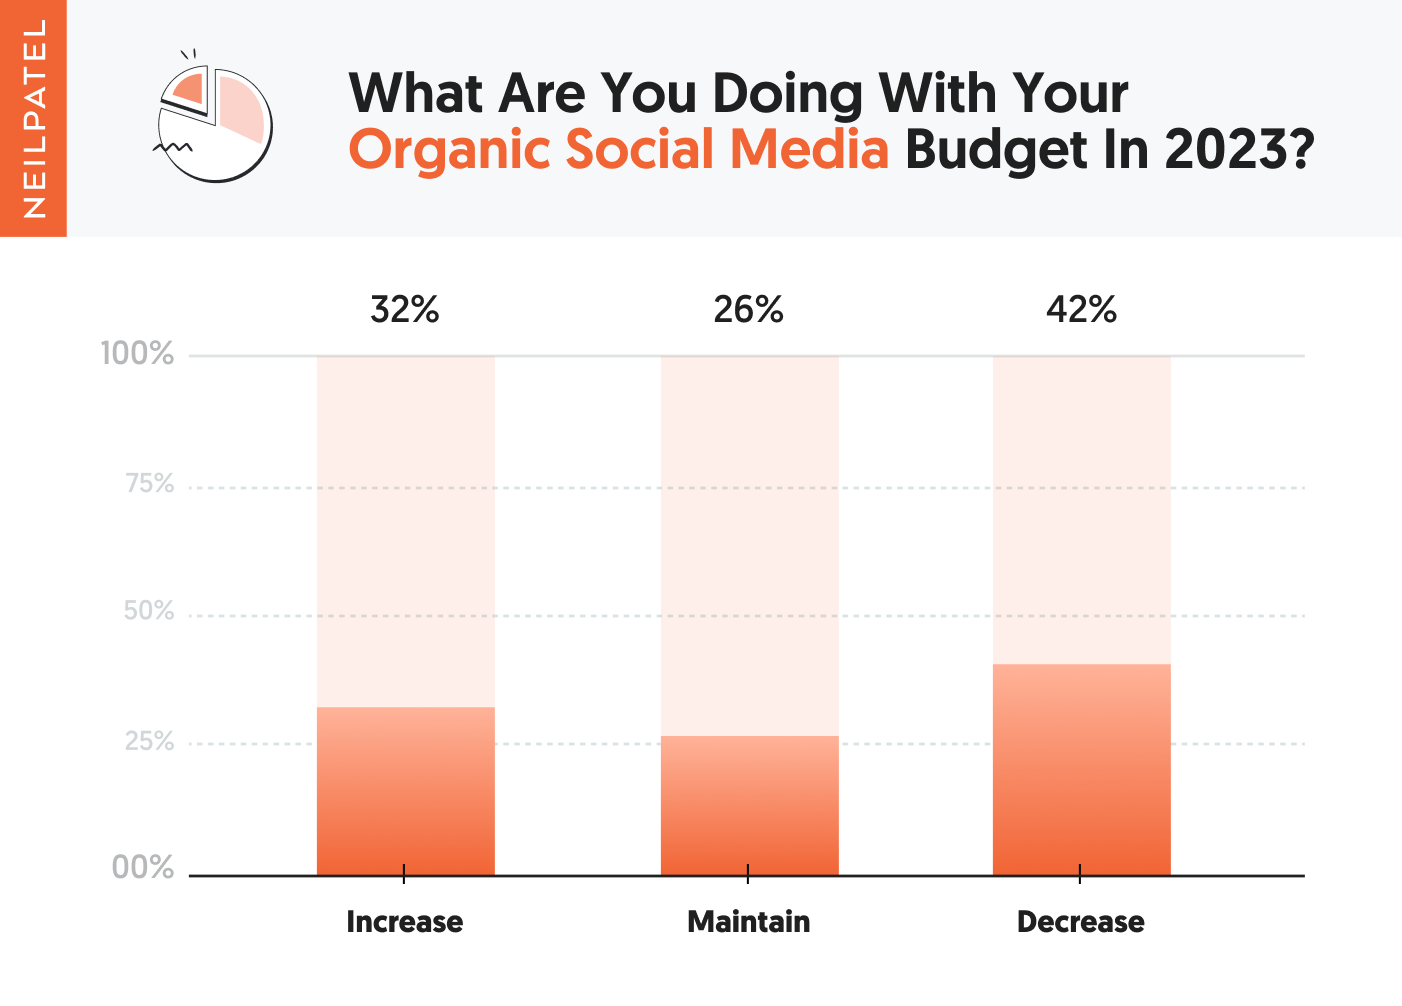 What are you doing with your organic social media budget in 2023